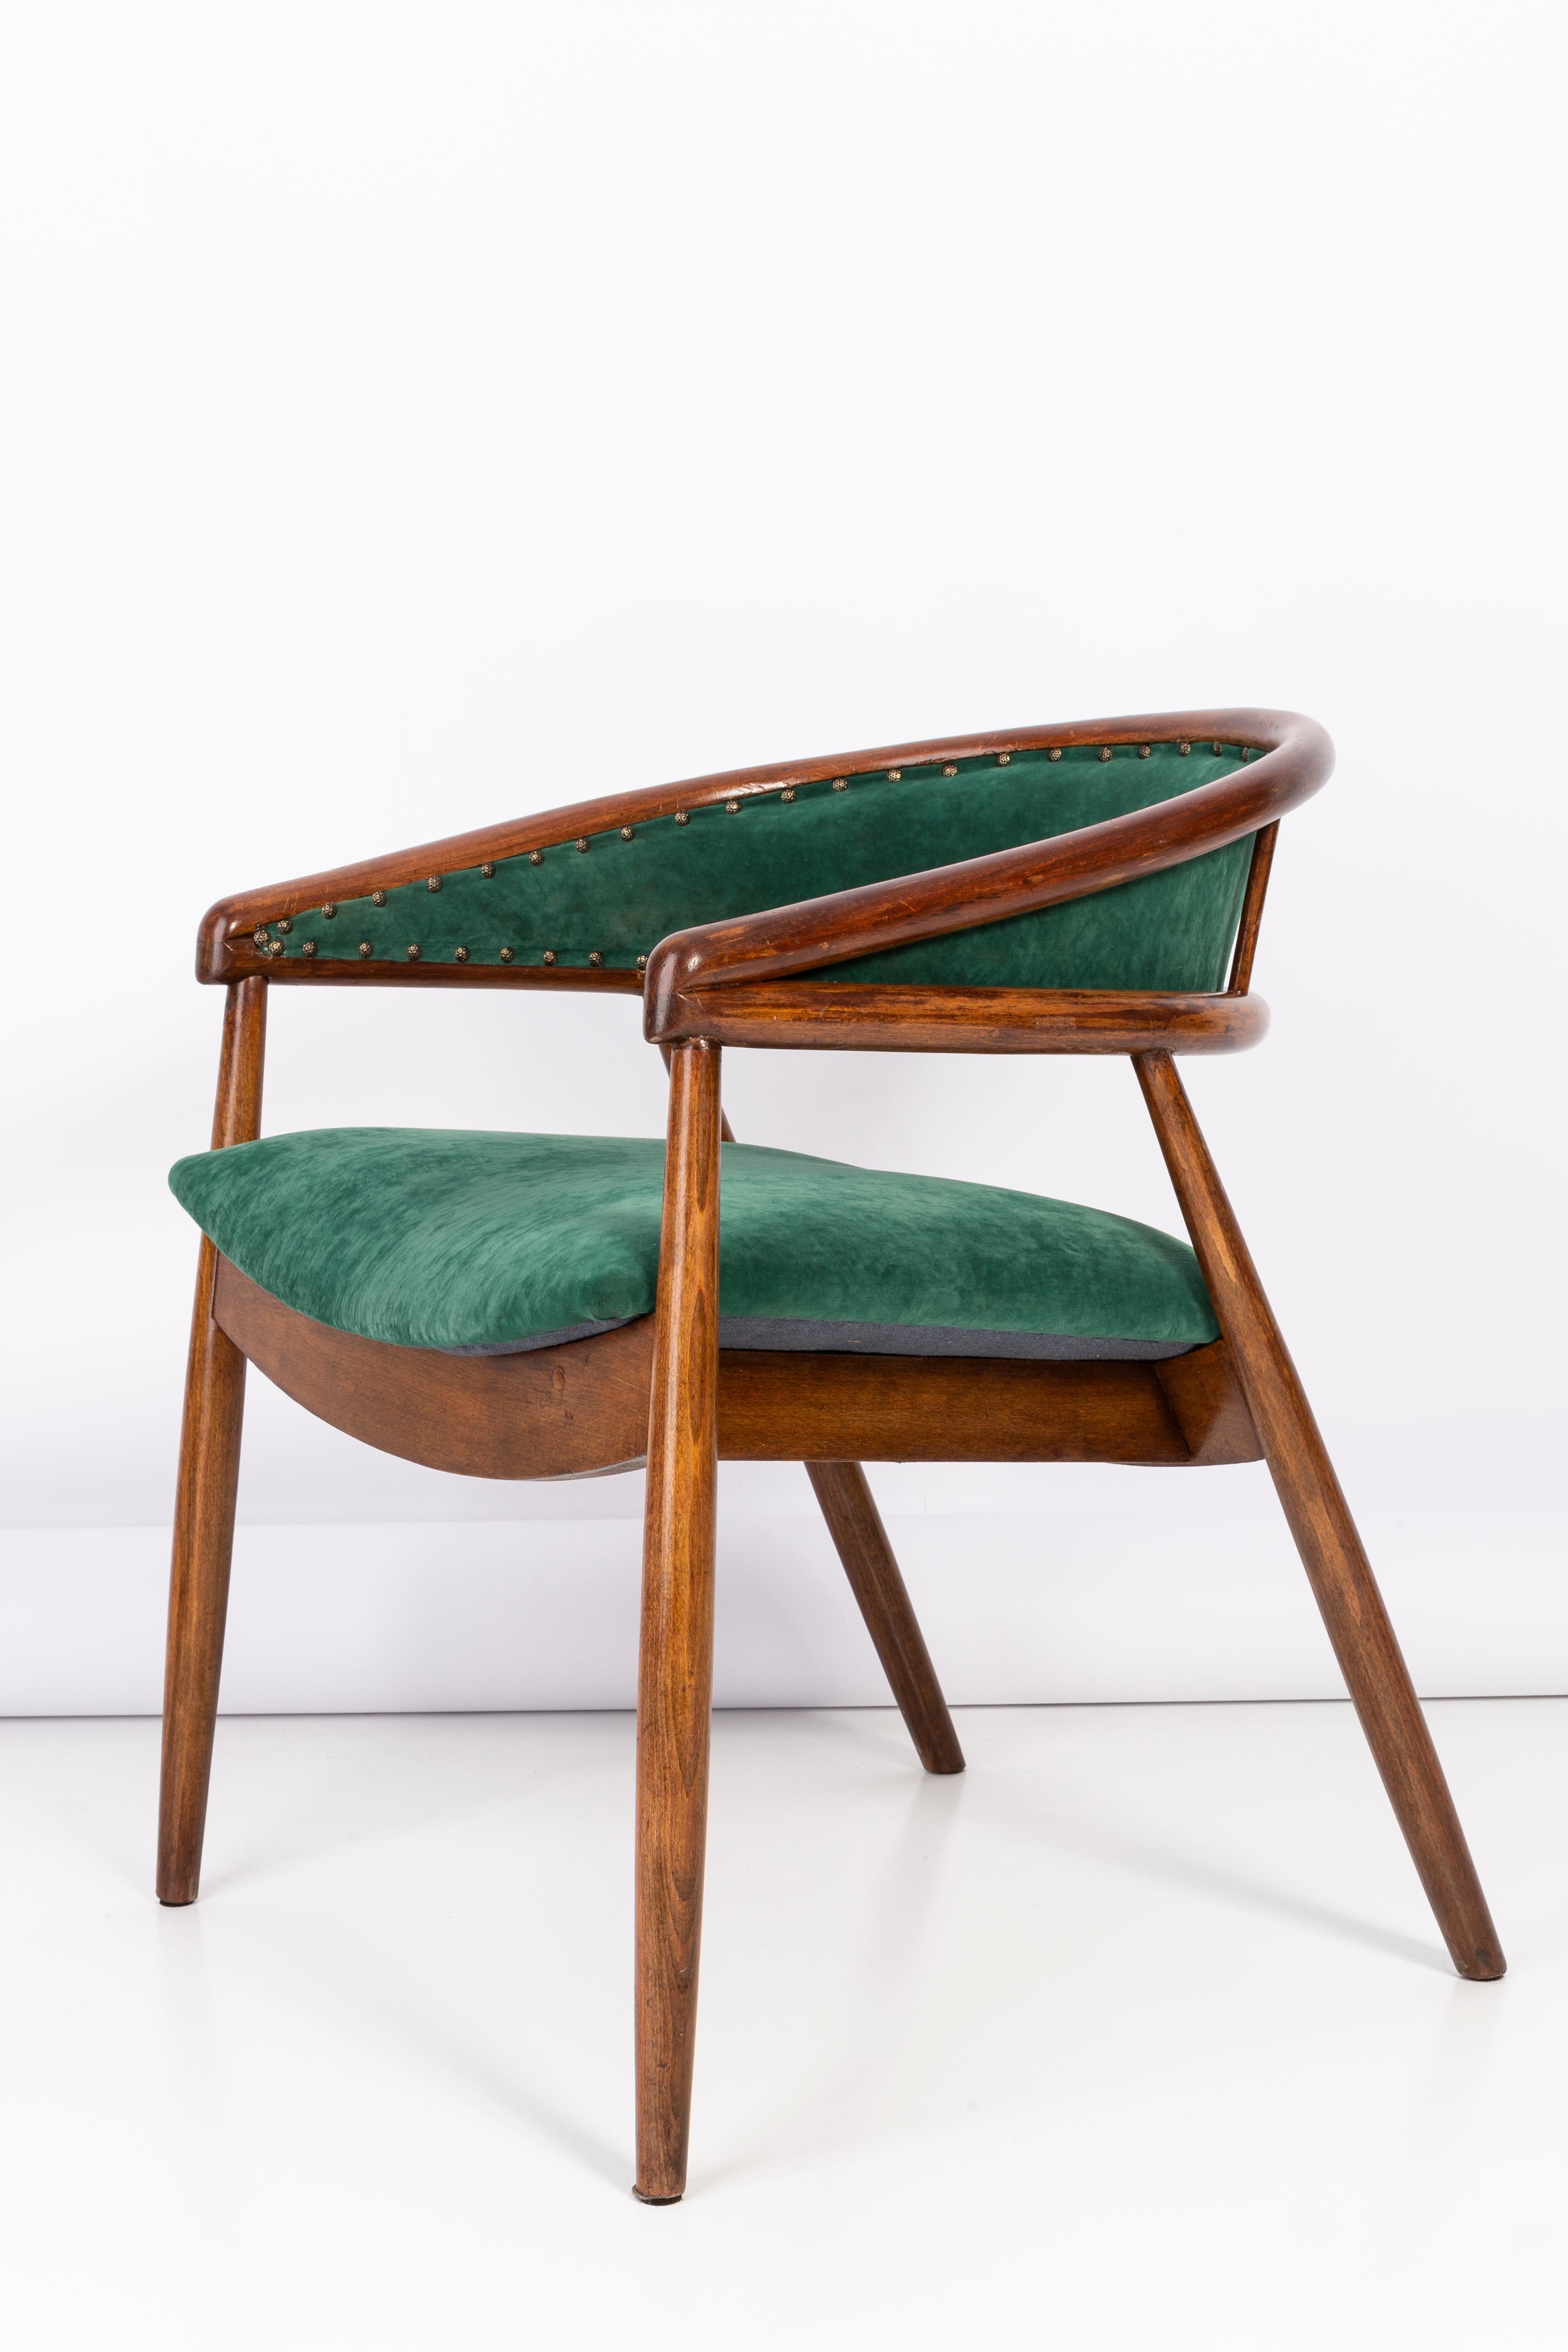 Set of Two James Mont Bent Beech Armchairs, Dark Green, B-3300 Type, 1960s For Sale 1